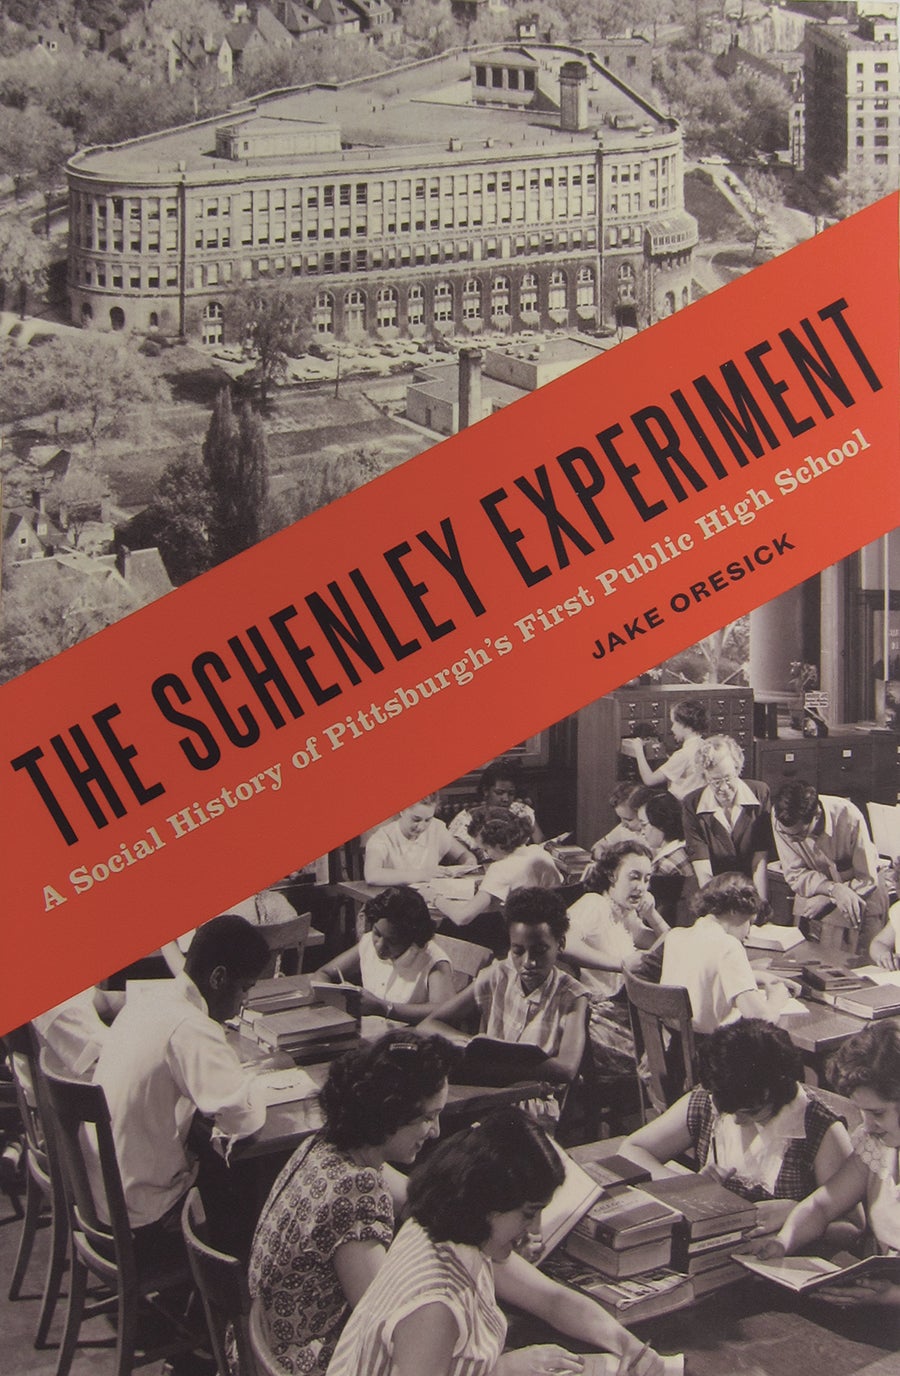 The Schenley Experiment book cover